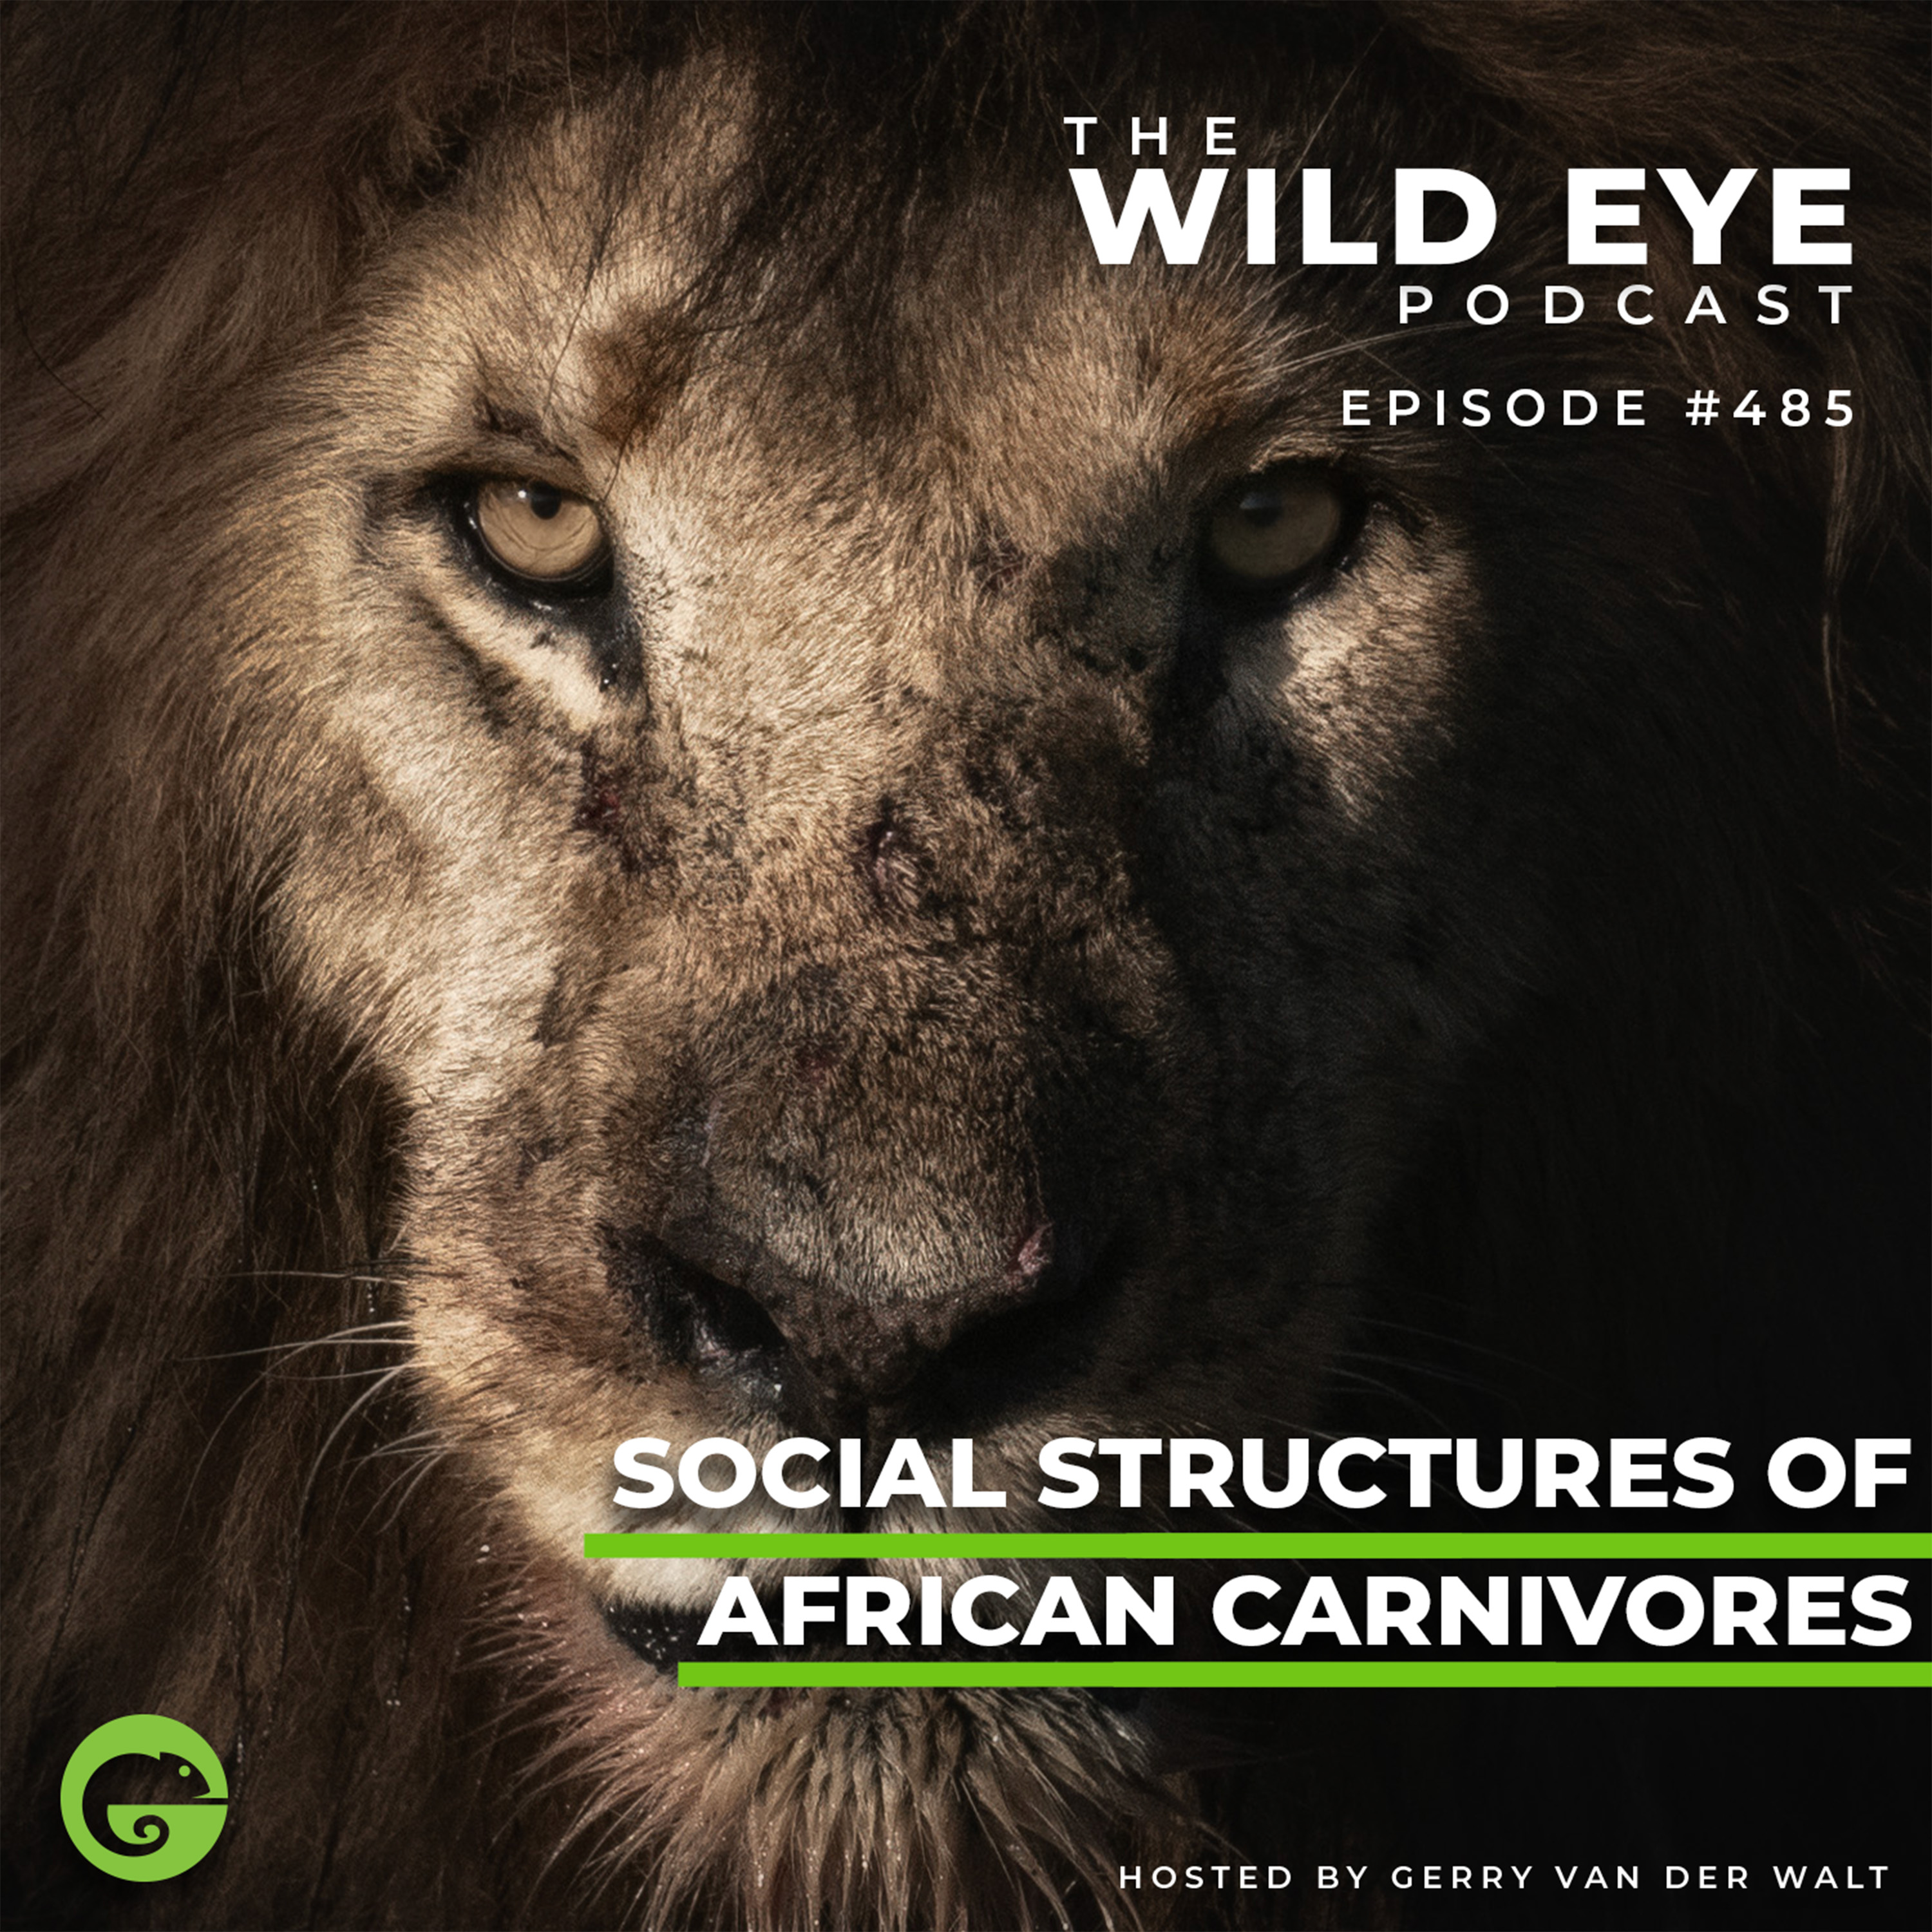 #485 - Social structures of African carnivores